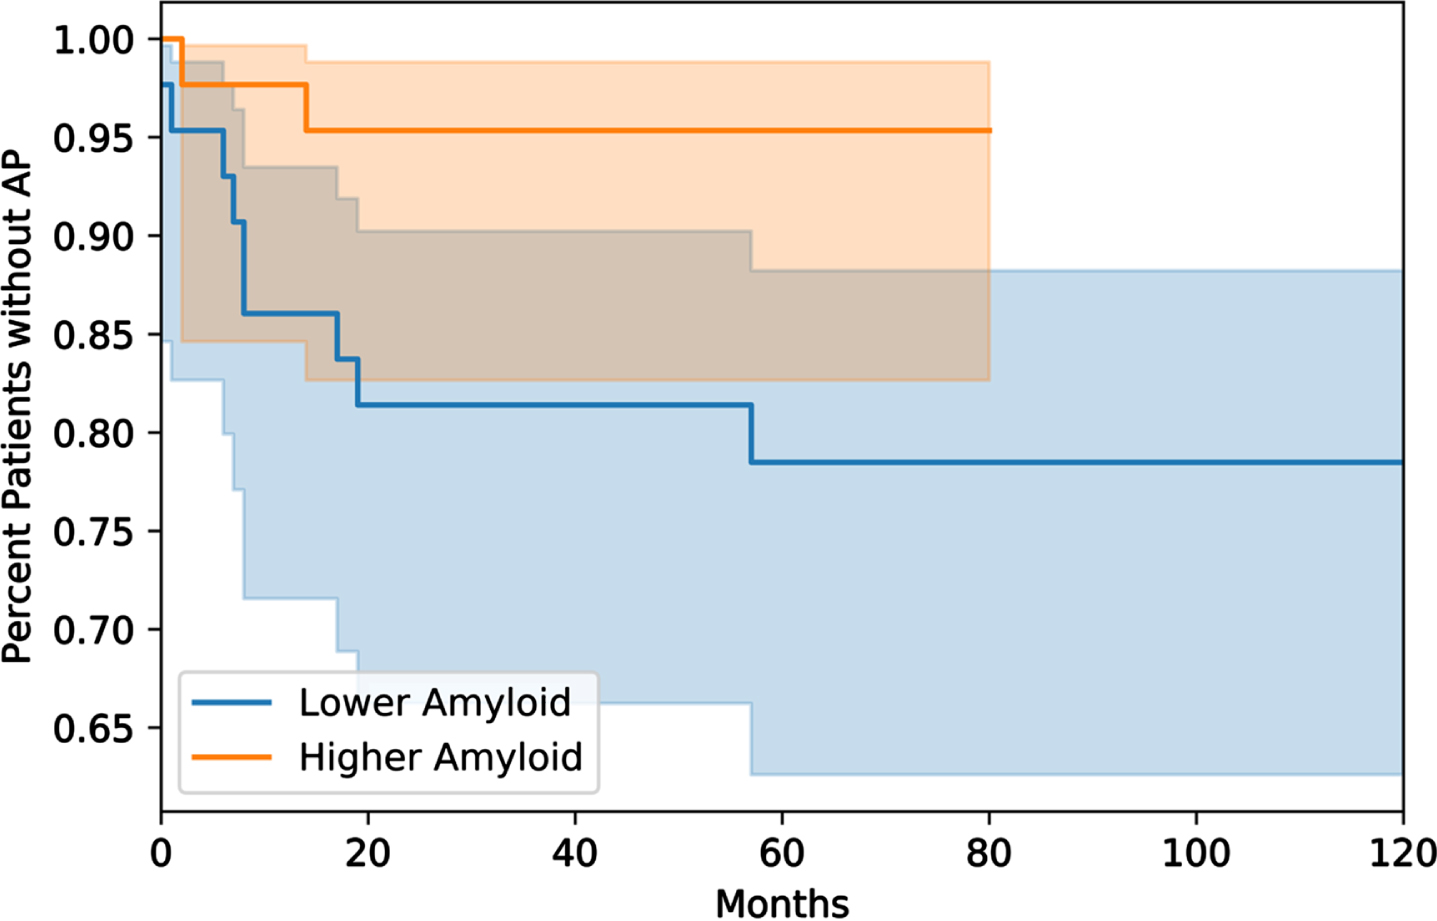 Kaplan-Meier survival analysis of time-to-antipsychotic use following testing of AD biomarkers. The group with the lower Aβ42 is in blue, while the higher-Aβ42 group is in orange. The shaded regions represent the 95% confidence intervals. Patients in the lower Aβ42 group had sooner time-to-AP use which was confirmed with a log-rank test (p = 0.04).